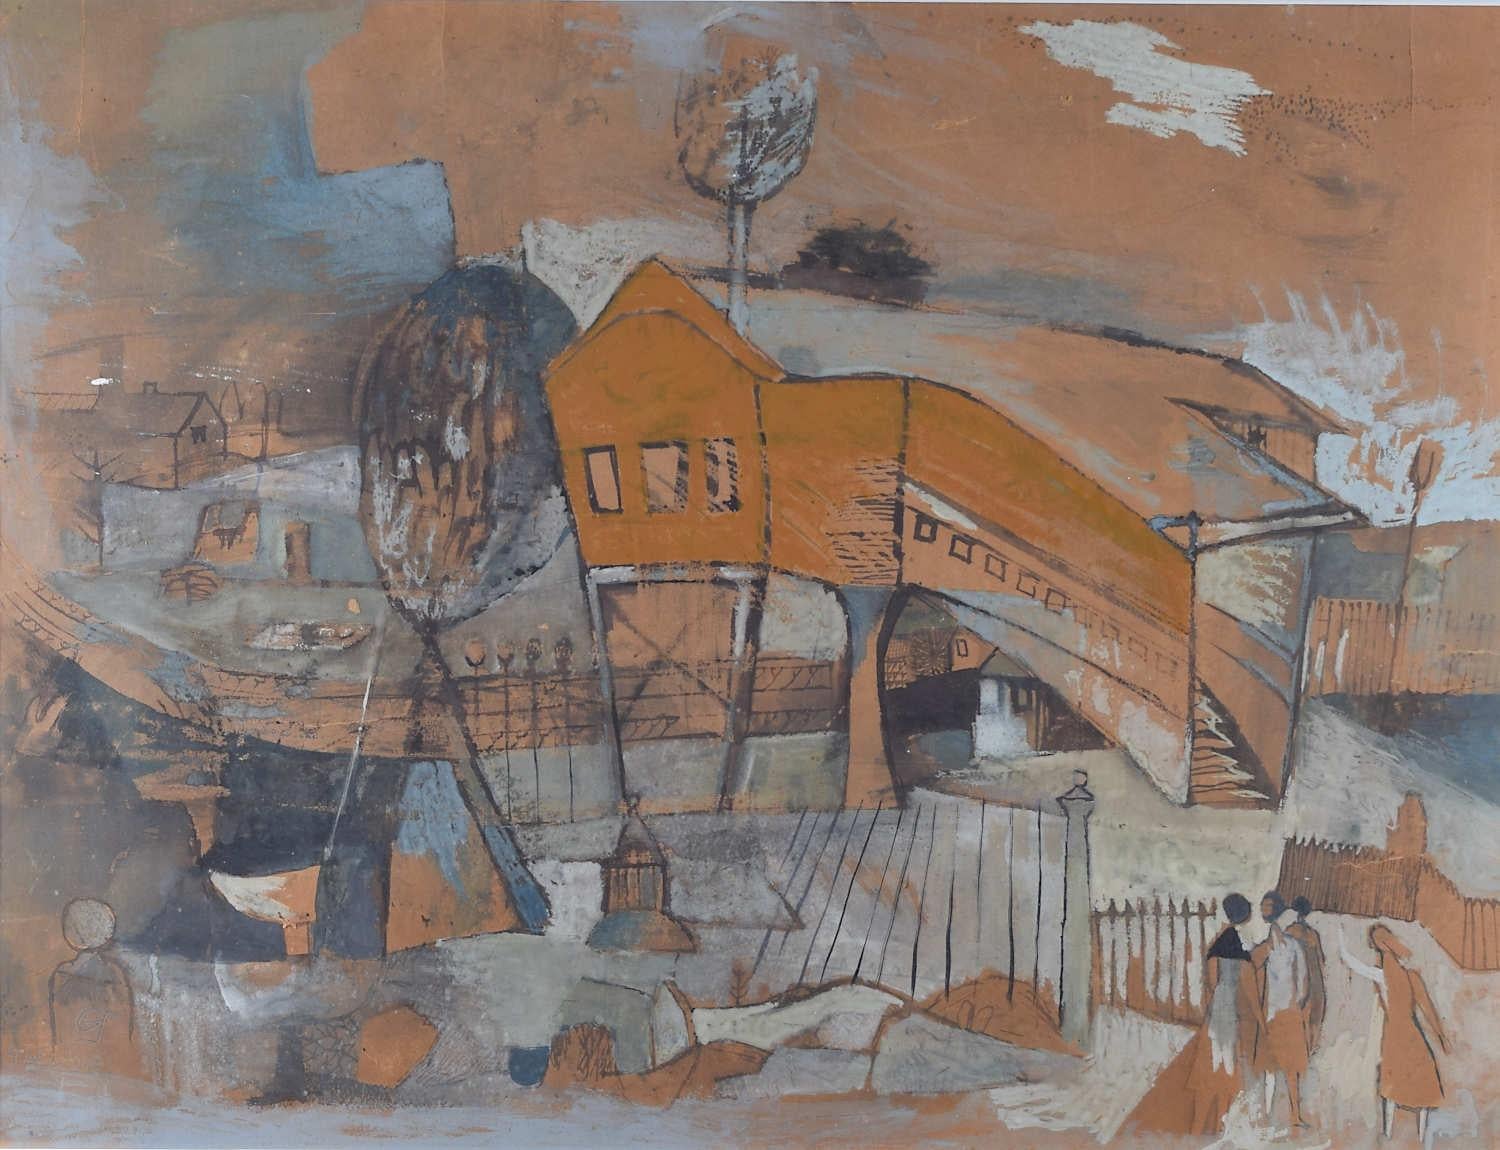 To see our other Modern British Art, scroll down to "More from this Seller" and below it click on "See all from this Seller" - or send us a message if you cannot find the artist you want.

Gwyneth Johnstone (1915 - 2010)
The Railway Bridge
Mixed